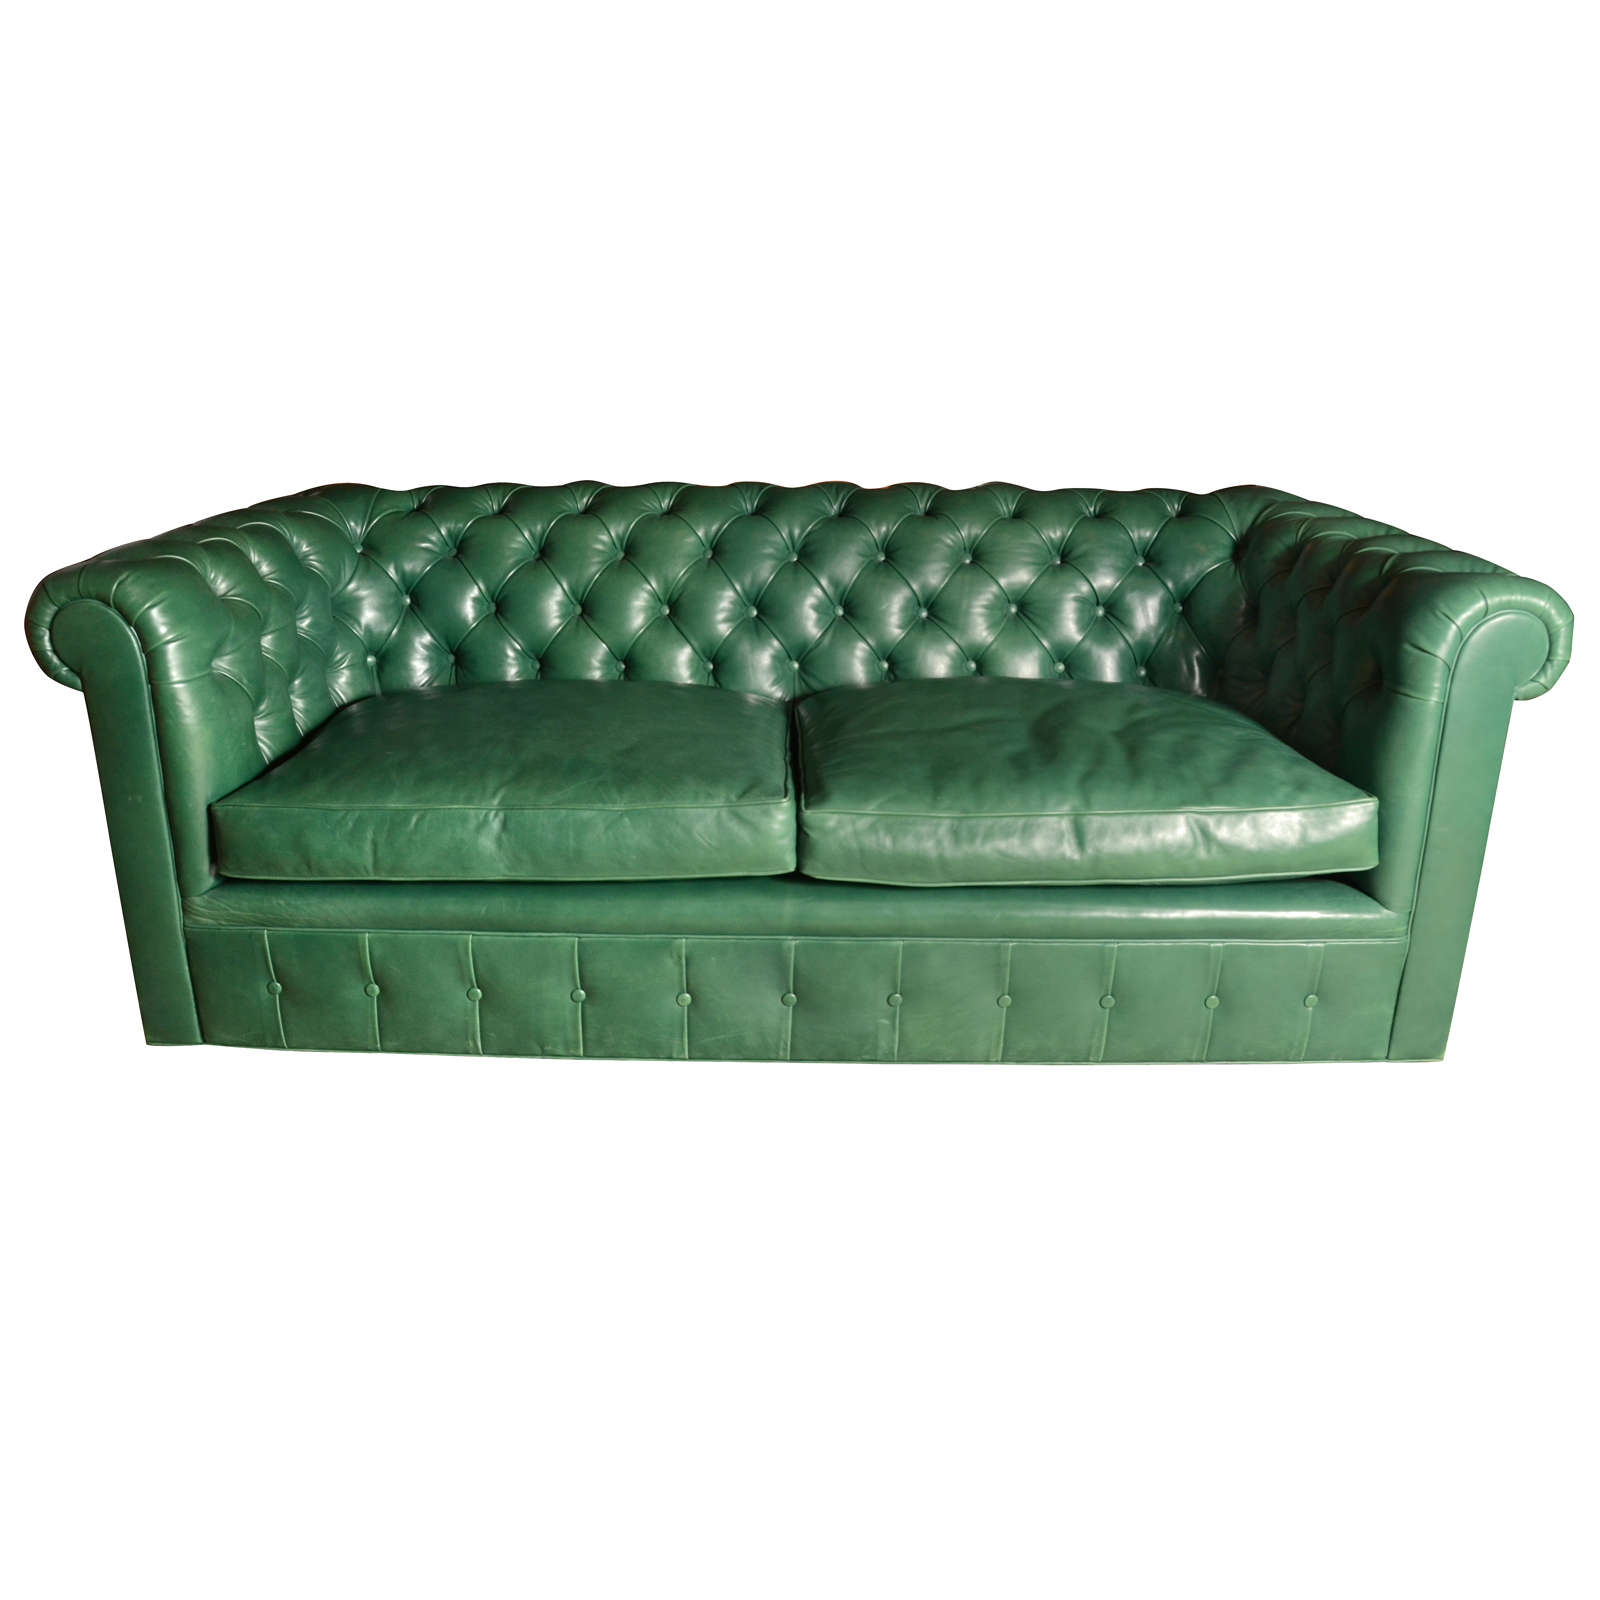 Emerald Green Mid Century Chesterfield Sofa From England For Sale